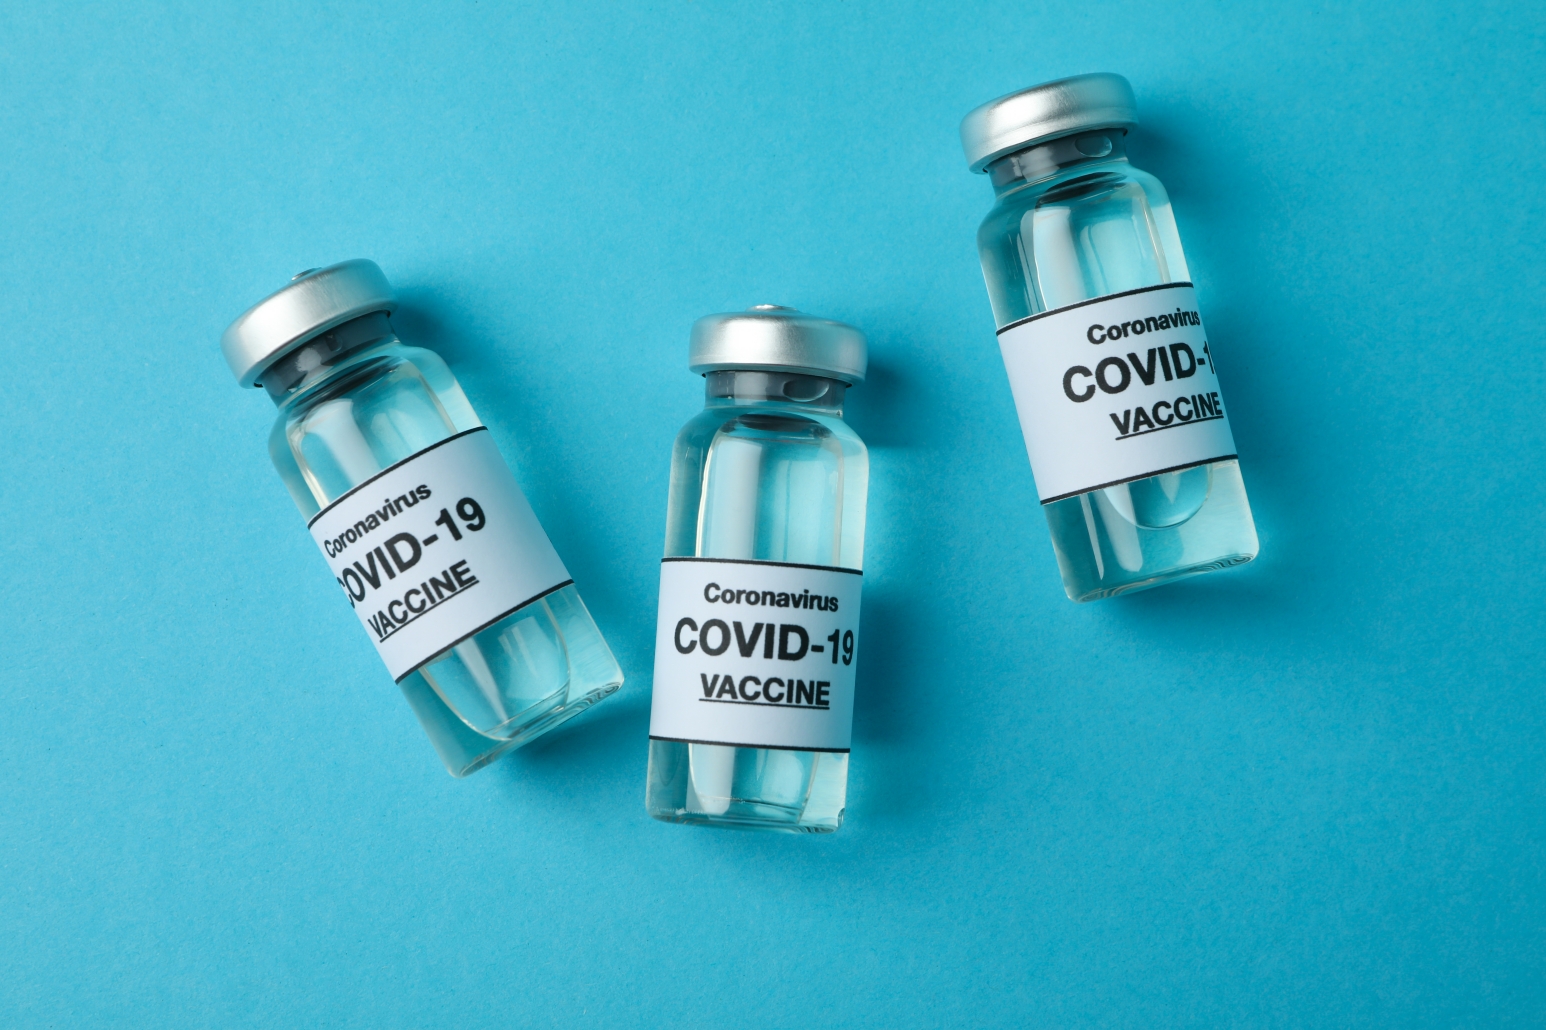 Vials of Covid - 19 vaccine on blue background